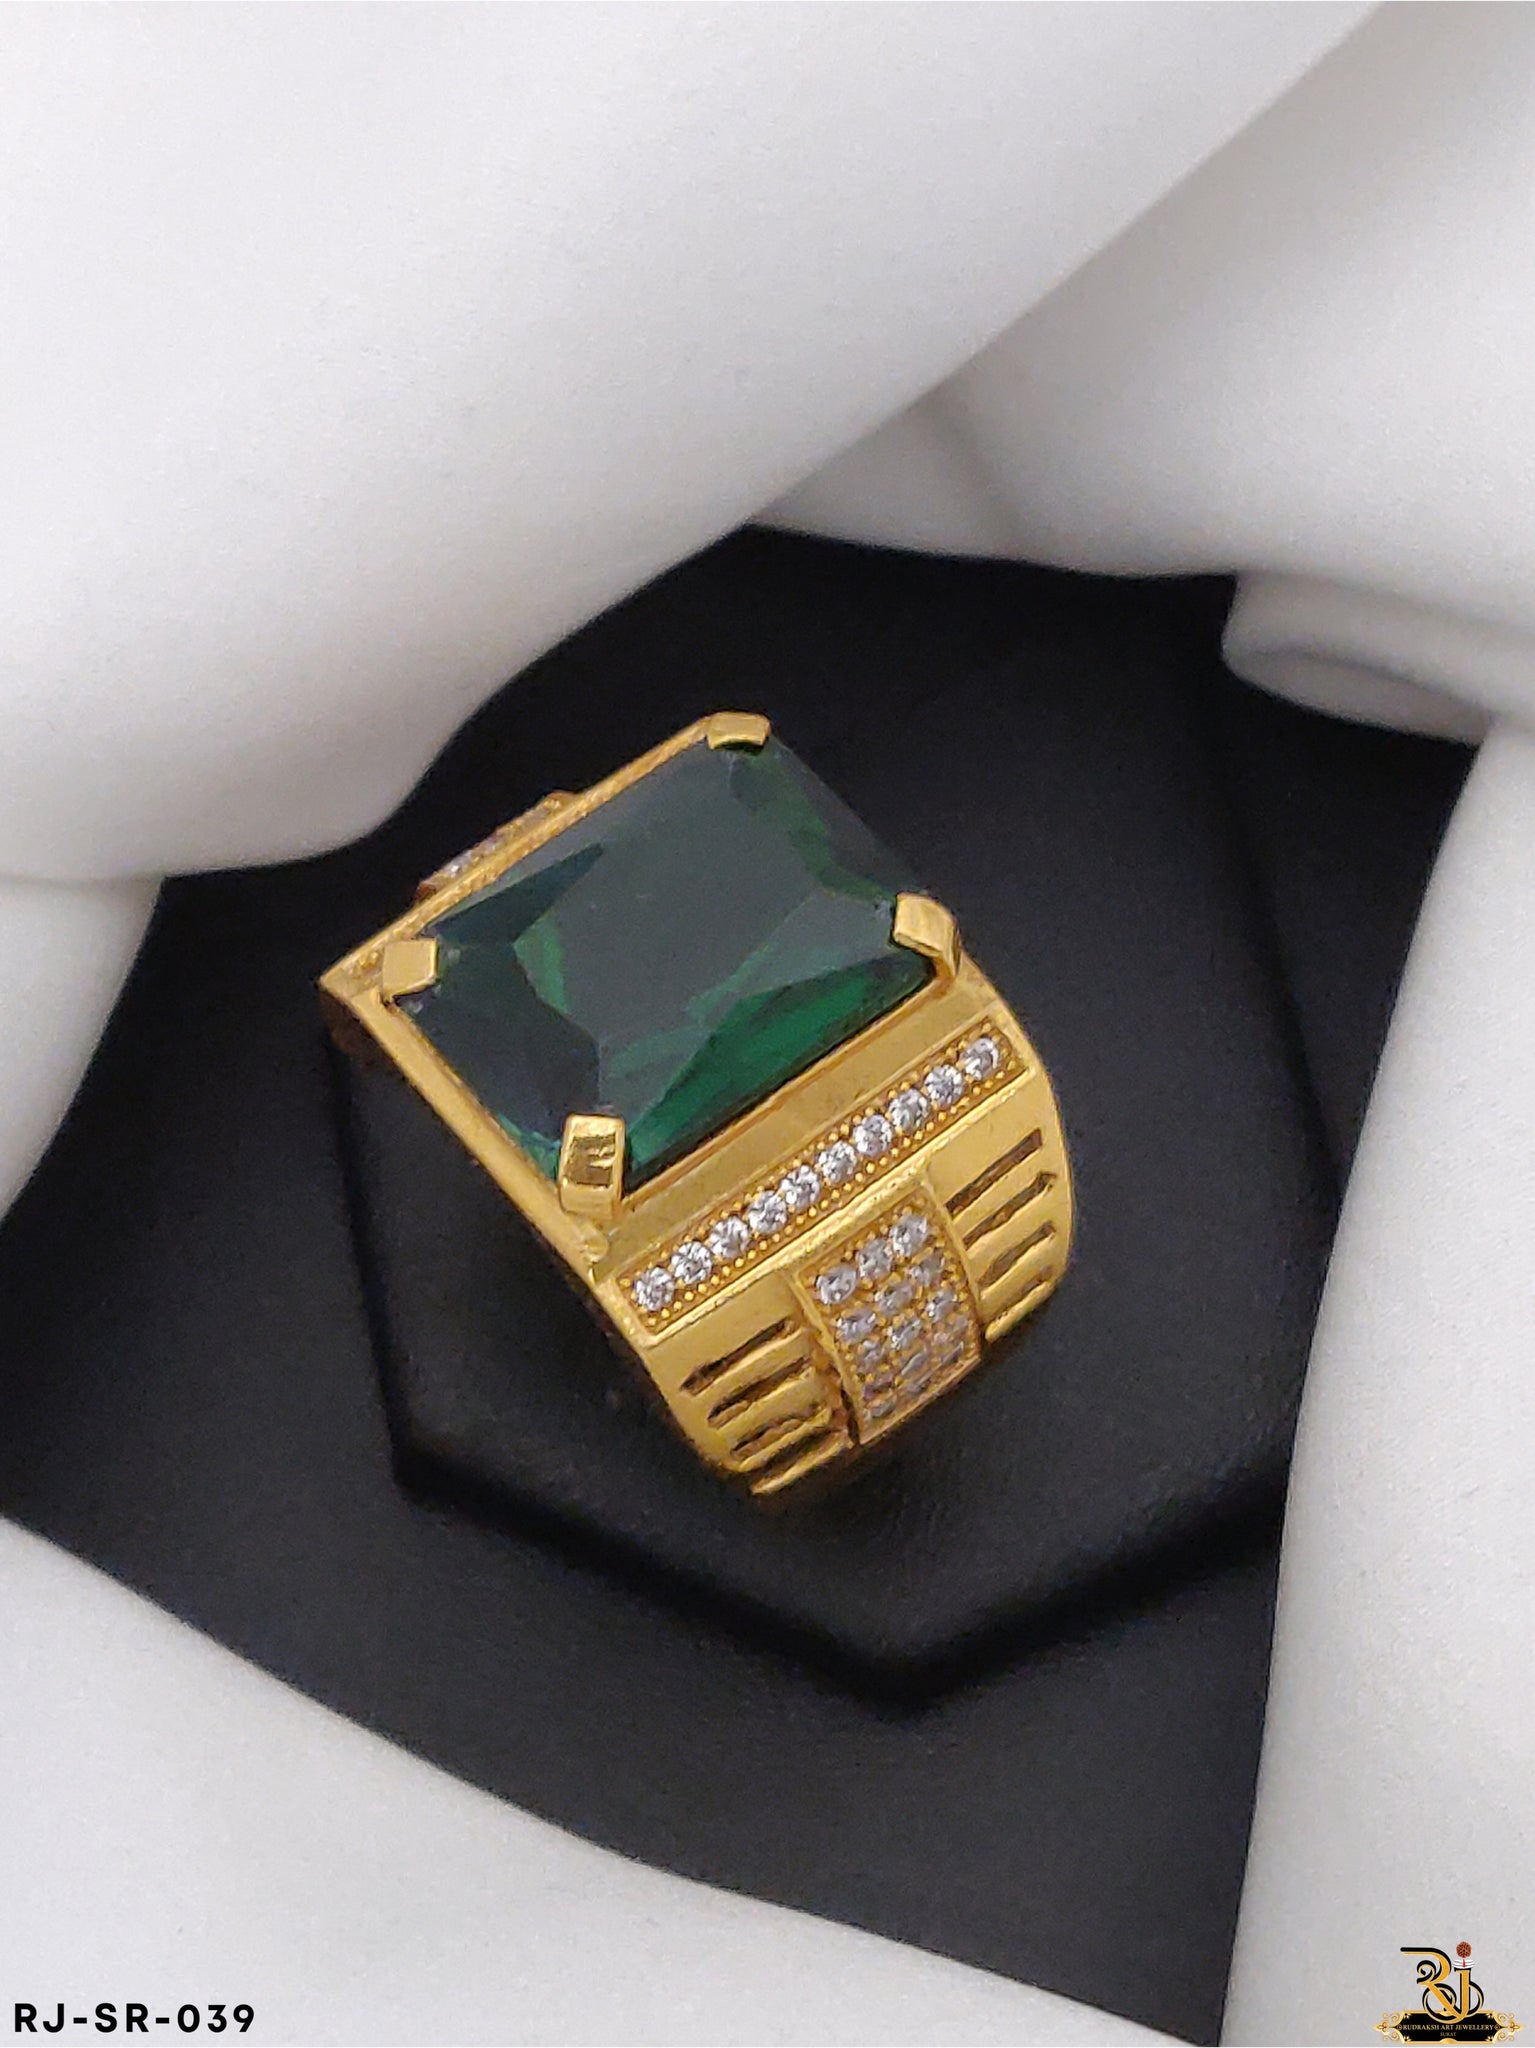 Mens Vintage Green Jade Emerald Gemstone Diamond Ring In Gold Tone  Fashionable Bague Bijoux Accessory From Shuiyan168, $26.54 | DHgate.Com